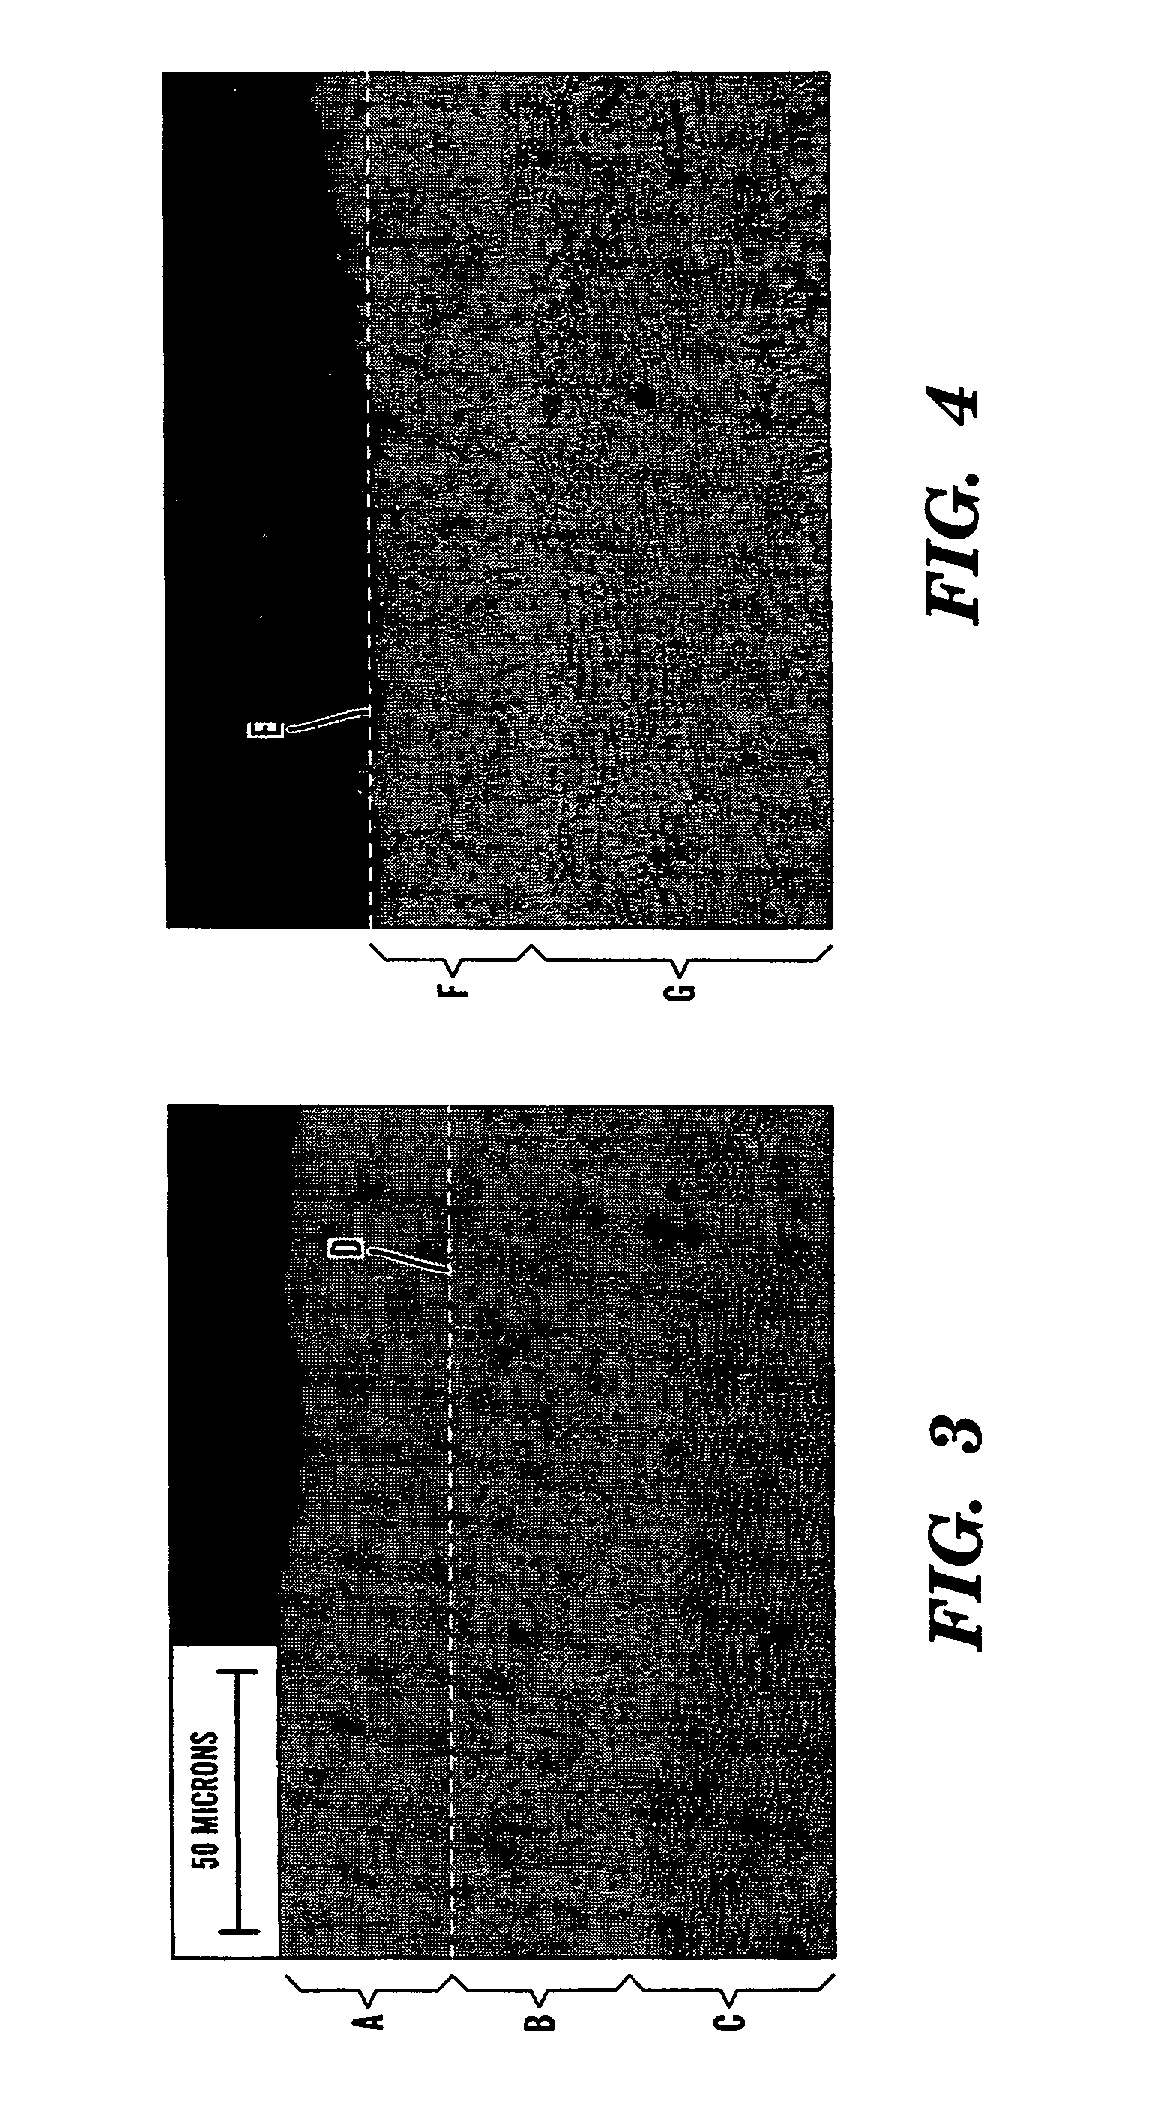 Process for partial stripping of diffusion aluminide coatings from metal substrates, and related compositions